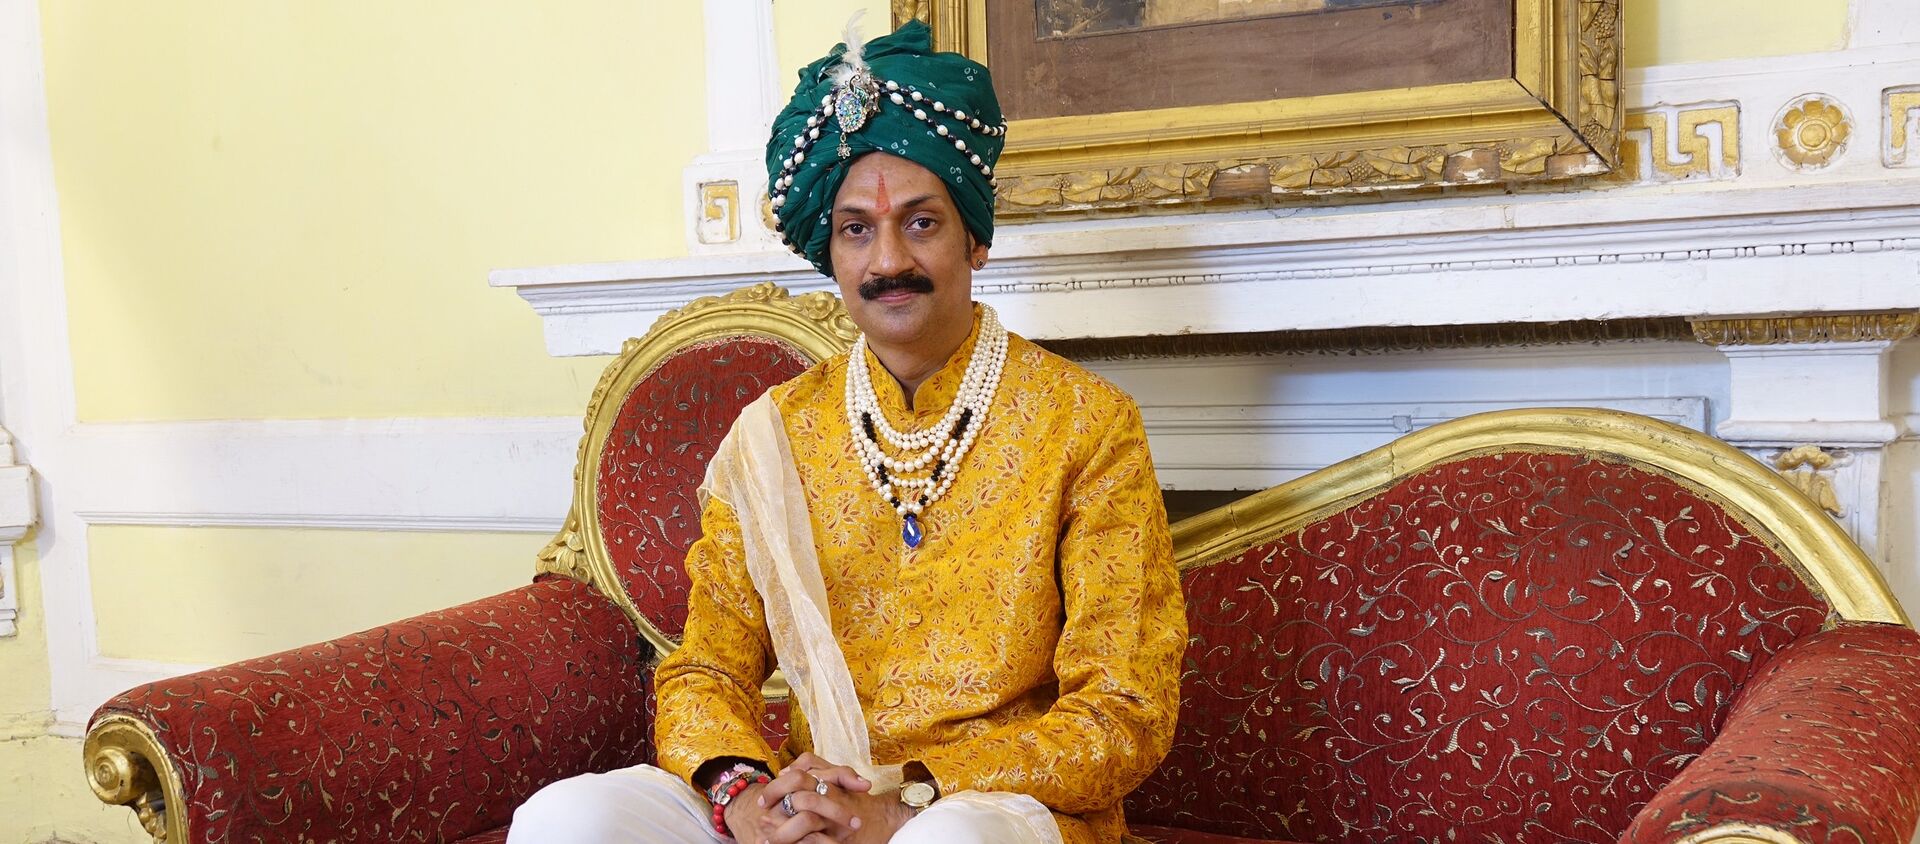 Prince Manvendra Singh Gohil, India's only openly gay prince, is throwing open his palace to vulnerable people of the LGBT community in his home state of Gujarat, India - Sputnik International, 1920, 11.01.2018